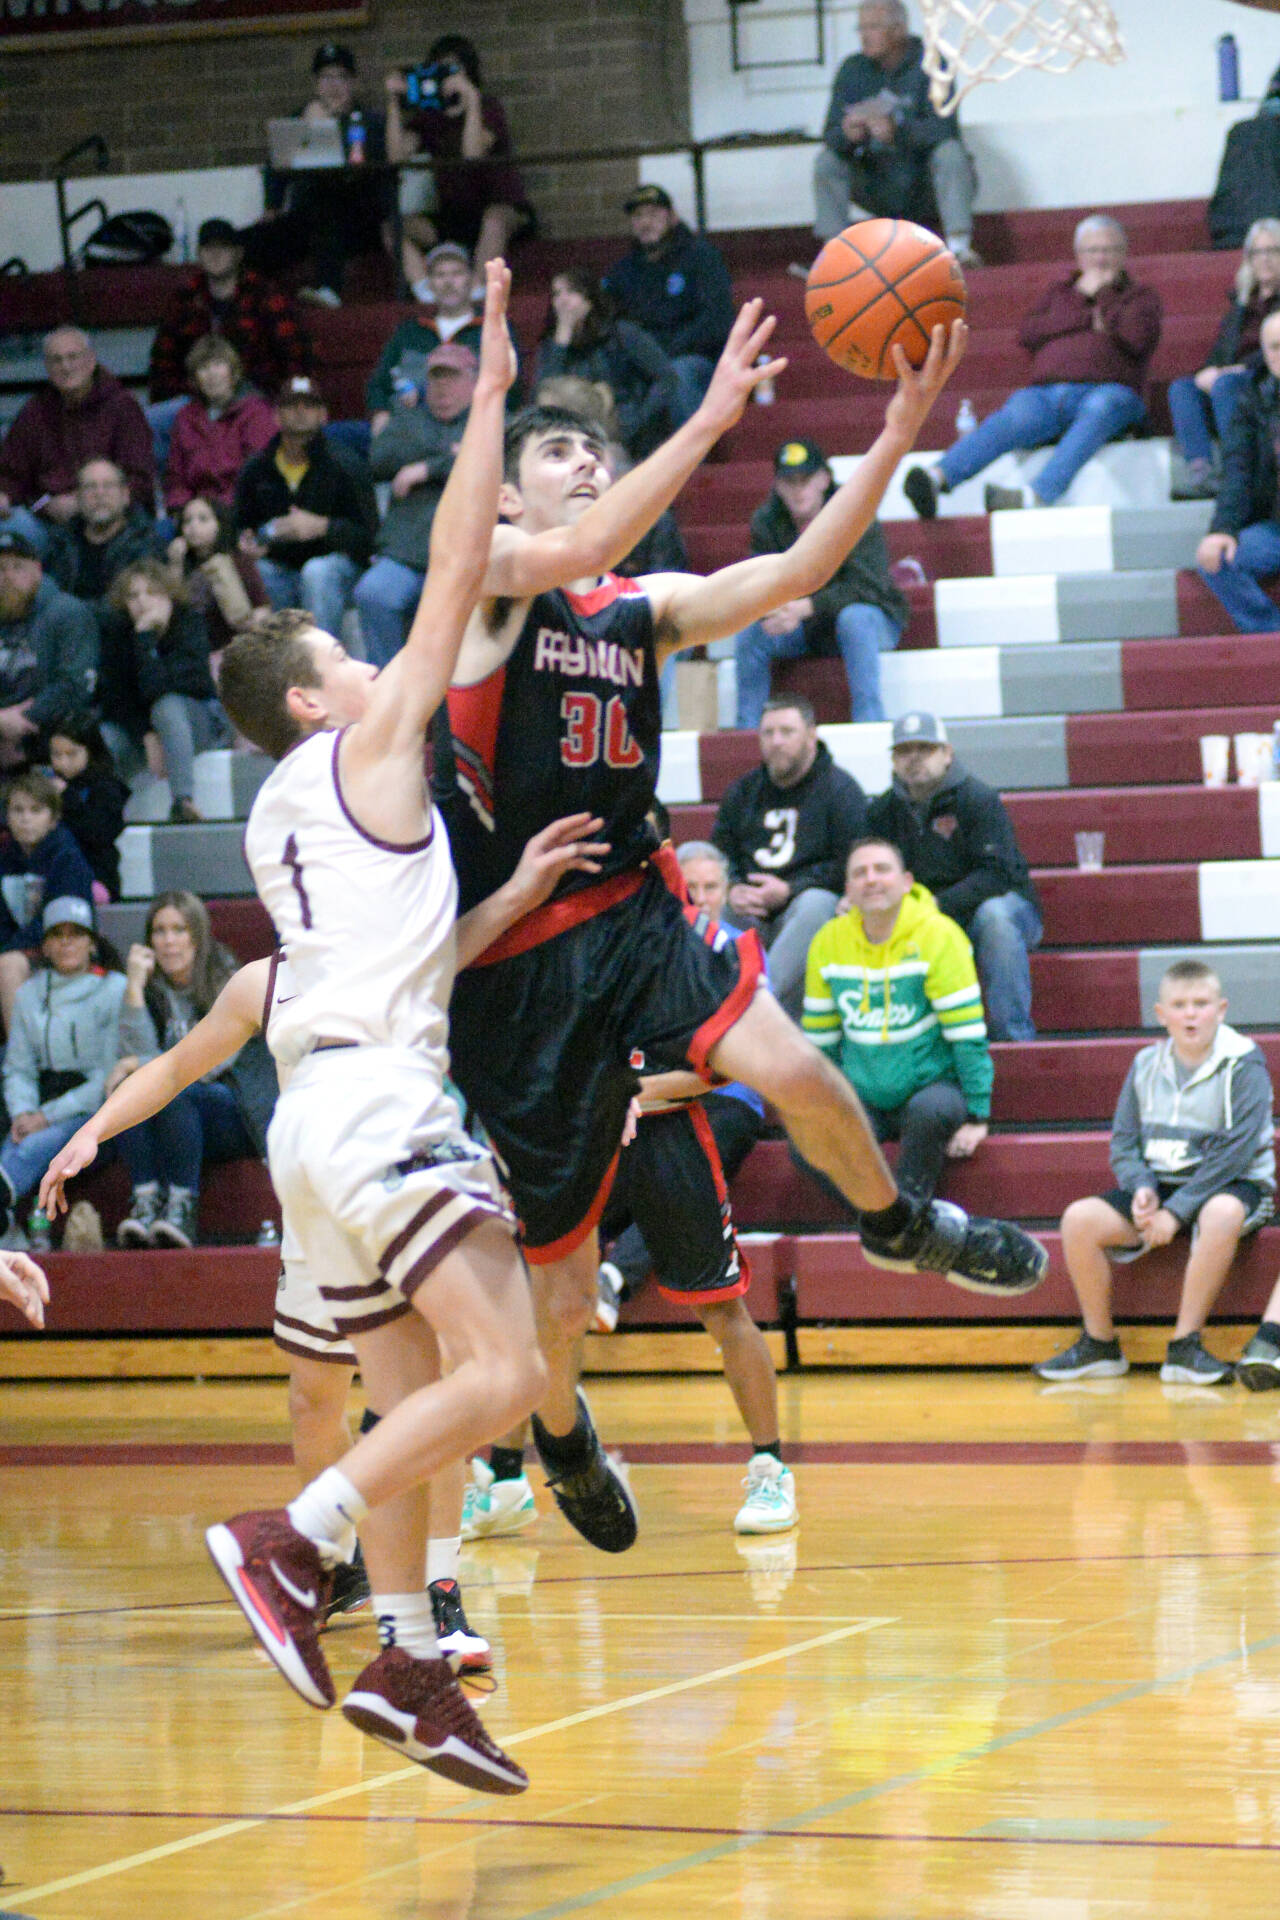 RYAN SPARKS | THE DAILY WORLD Raymond senior guard Morgan Anderson (30) scores on a layup while Montesano’s Terek Gunter defends during the Seagulls’ 60-47 victory on Wednesday at Montesano High School. Anderson scored 23 points to lead the Seagulls.